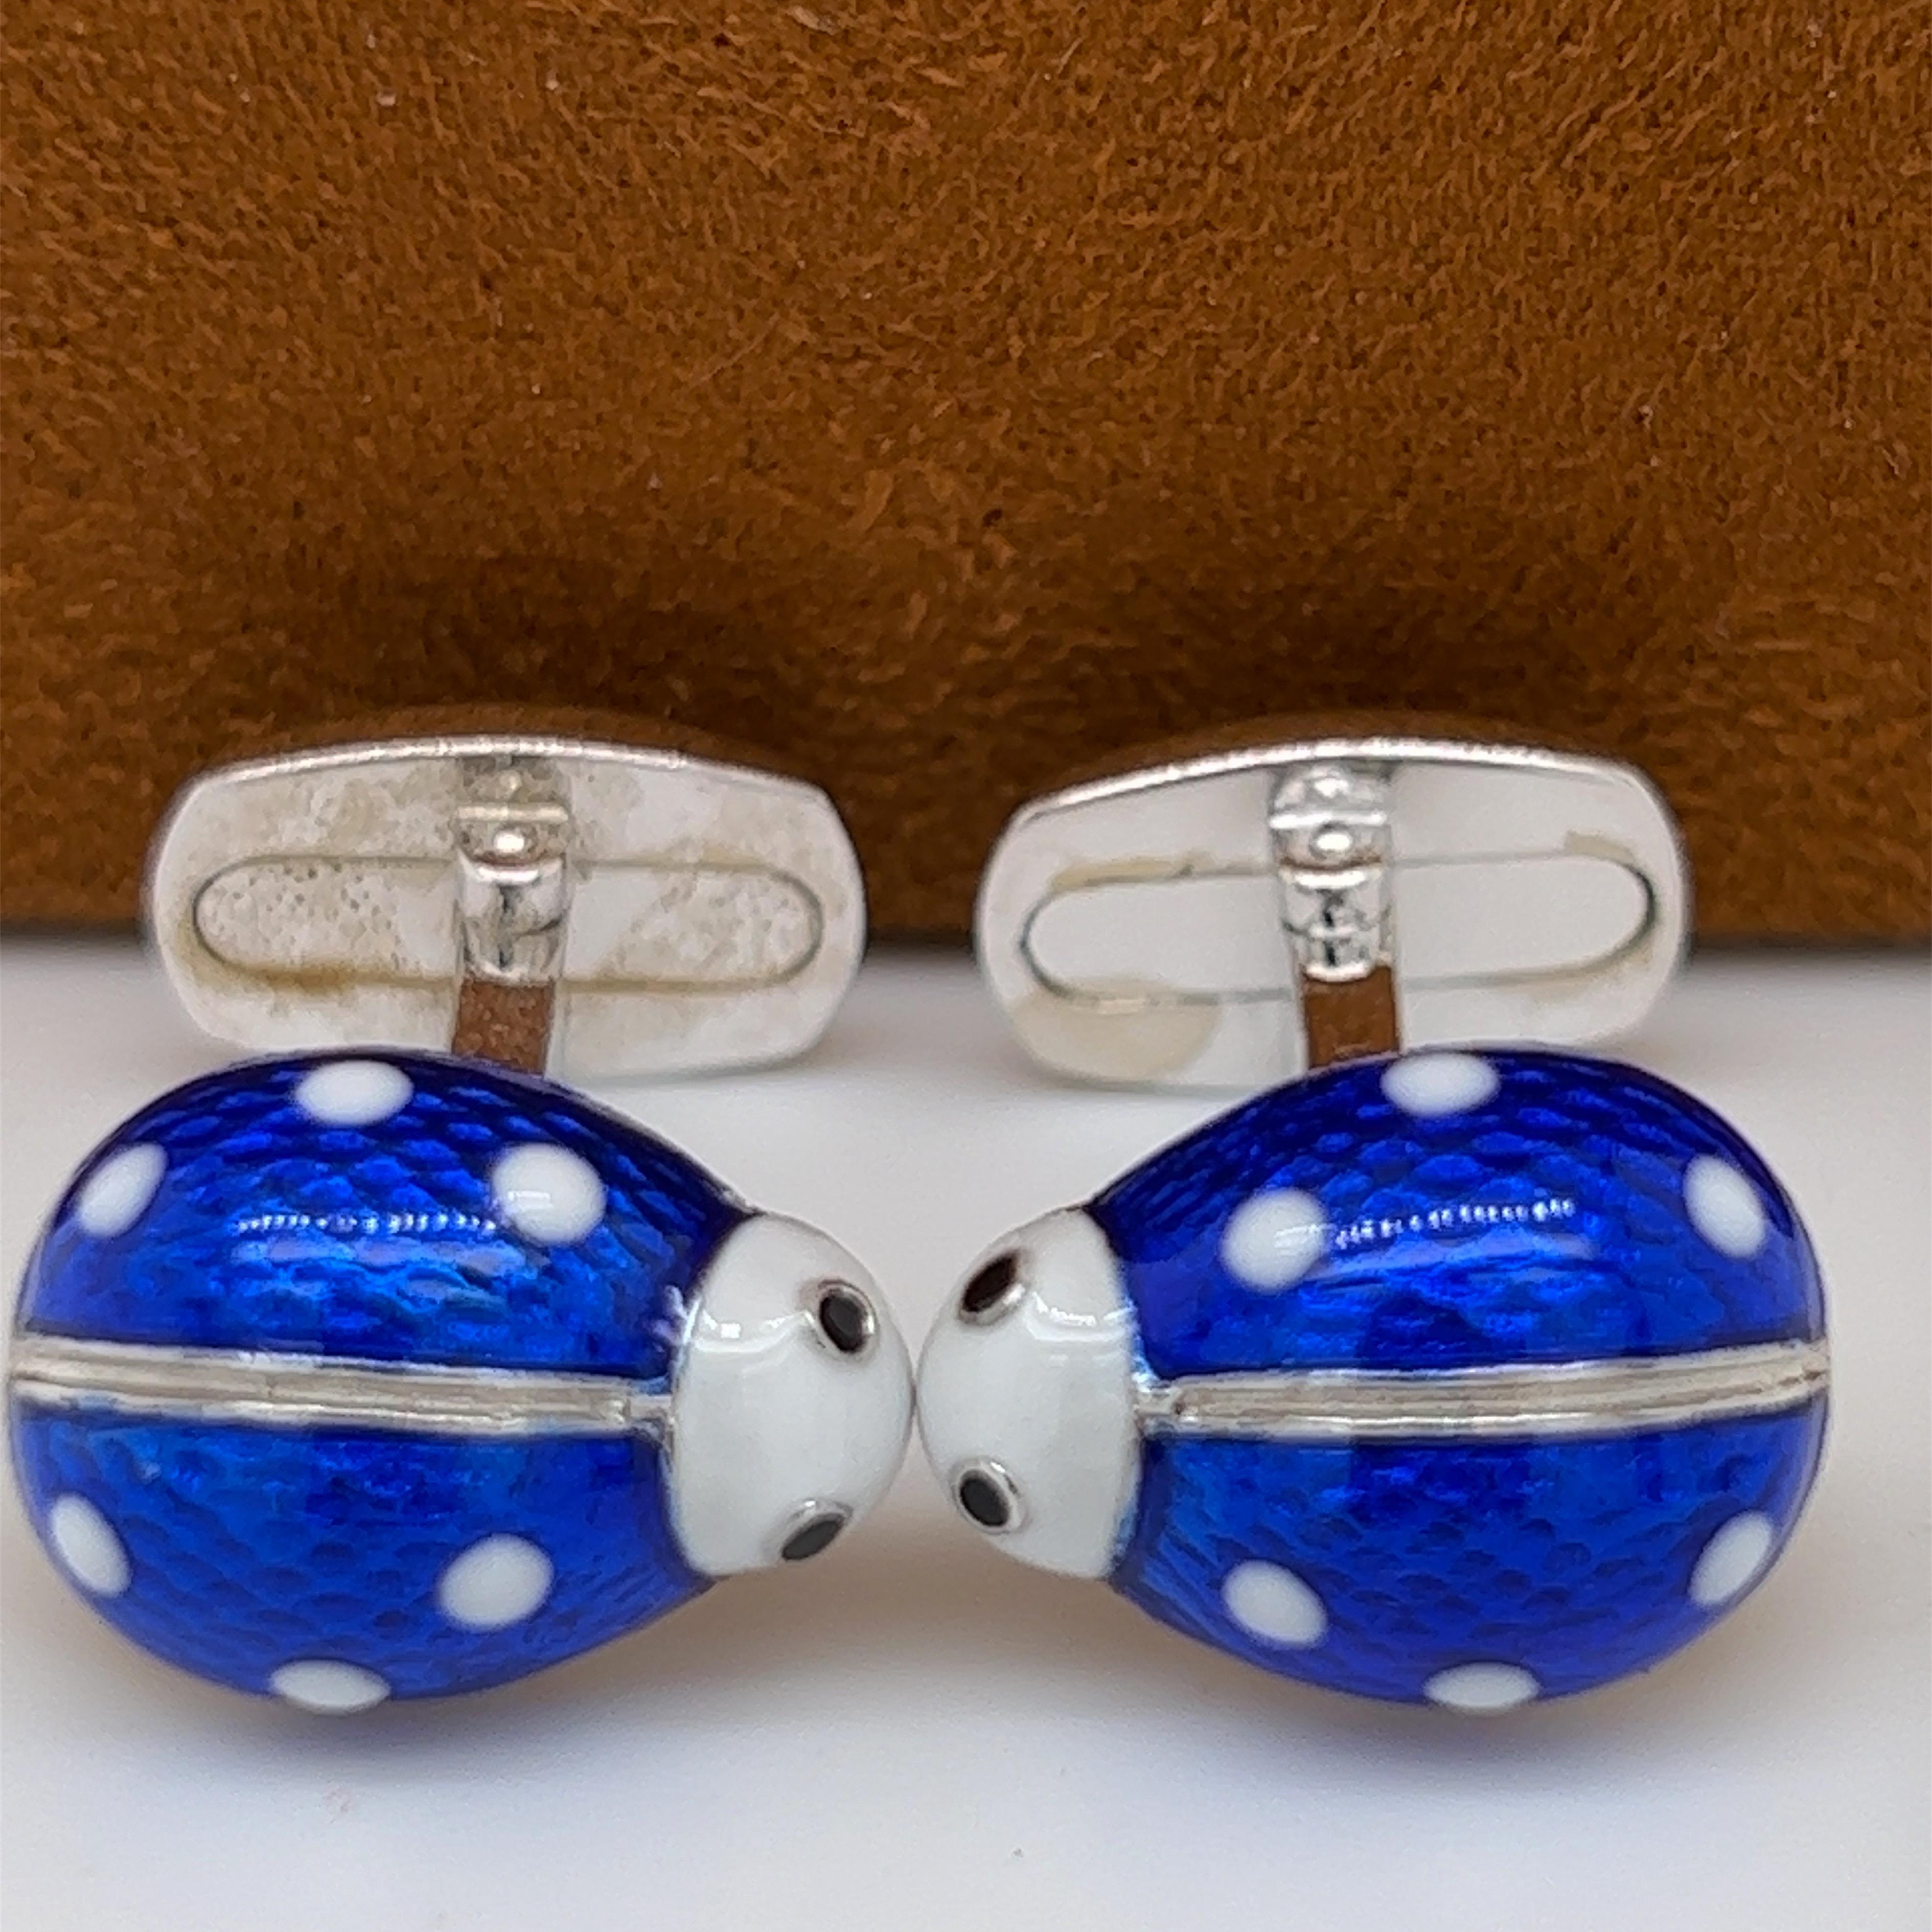 Chic White Dots and Royal Blue Hand Enameled Little Ladybug Shaped T-Bar Back, Sterling Silver Cufflinks.
In our smart tobacco leather case and pouch.


